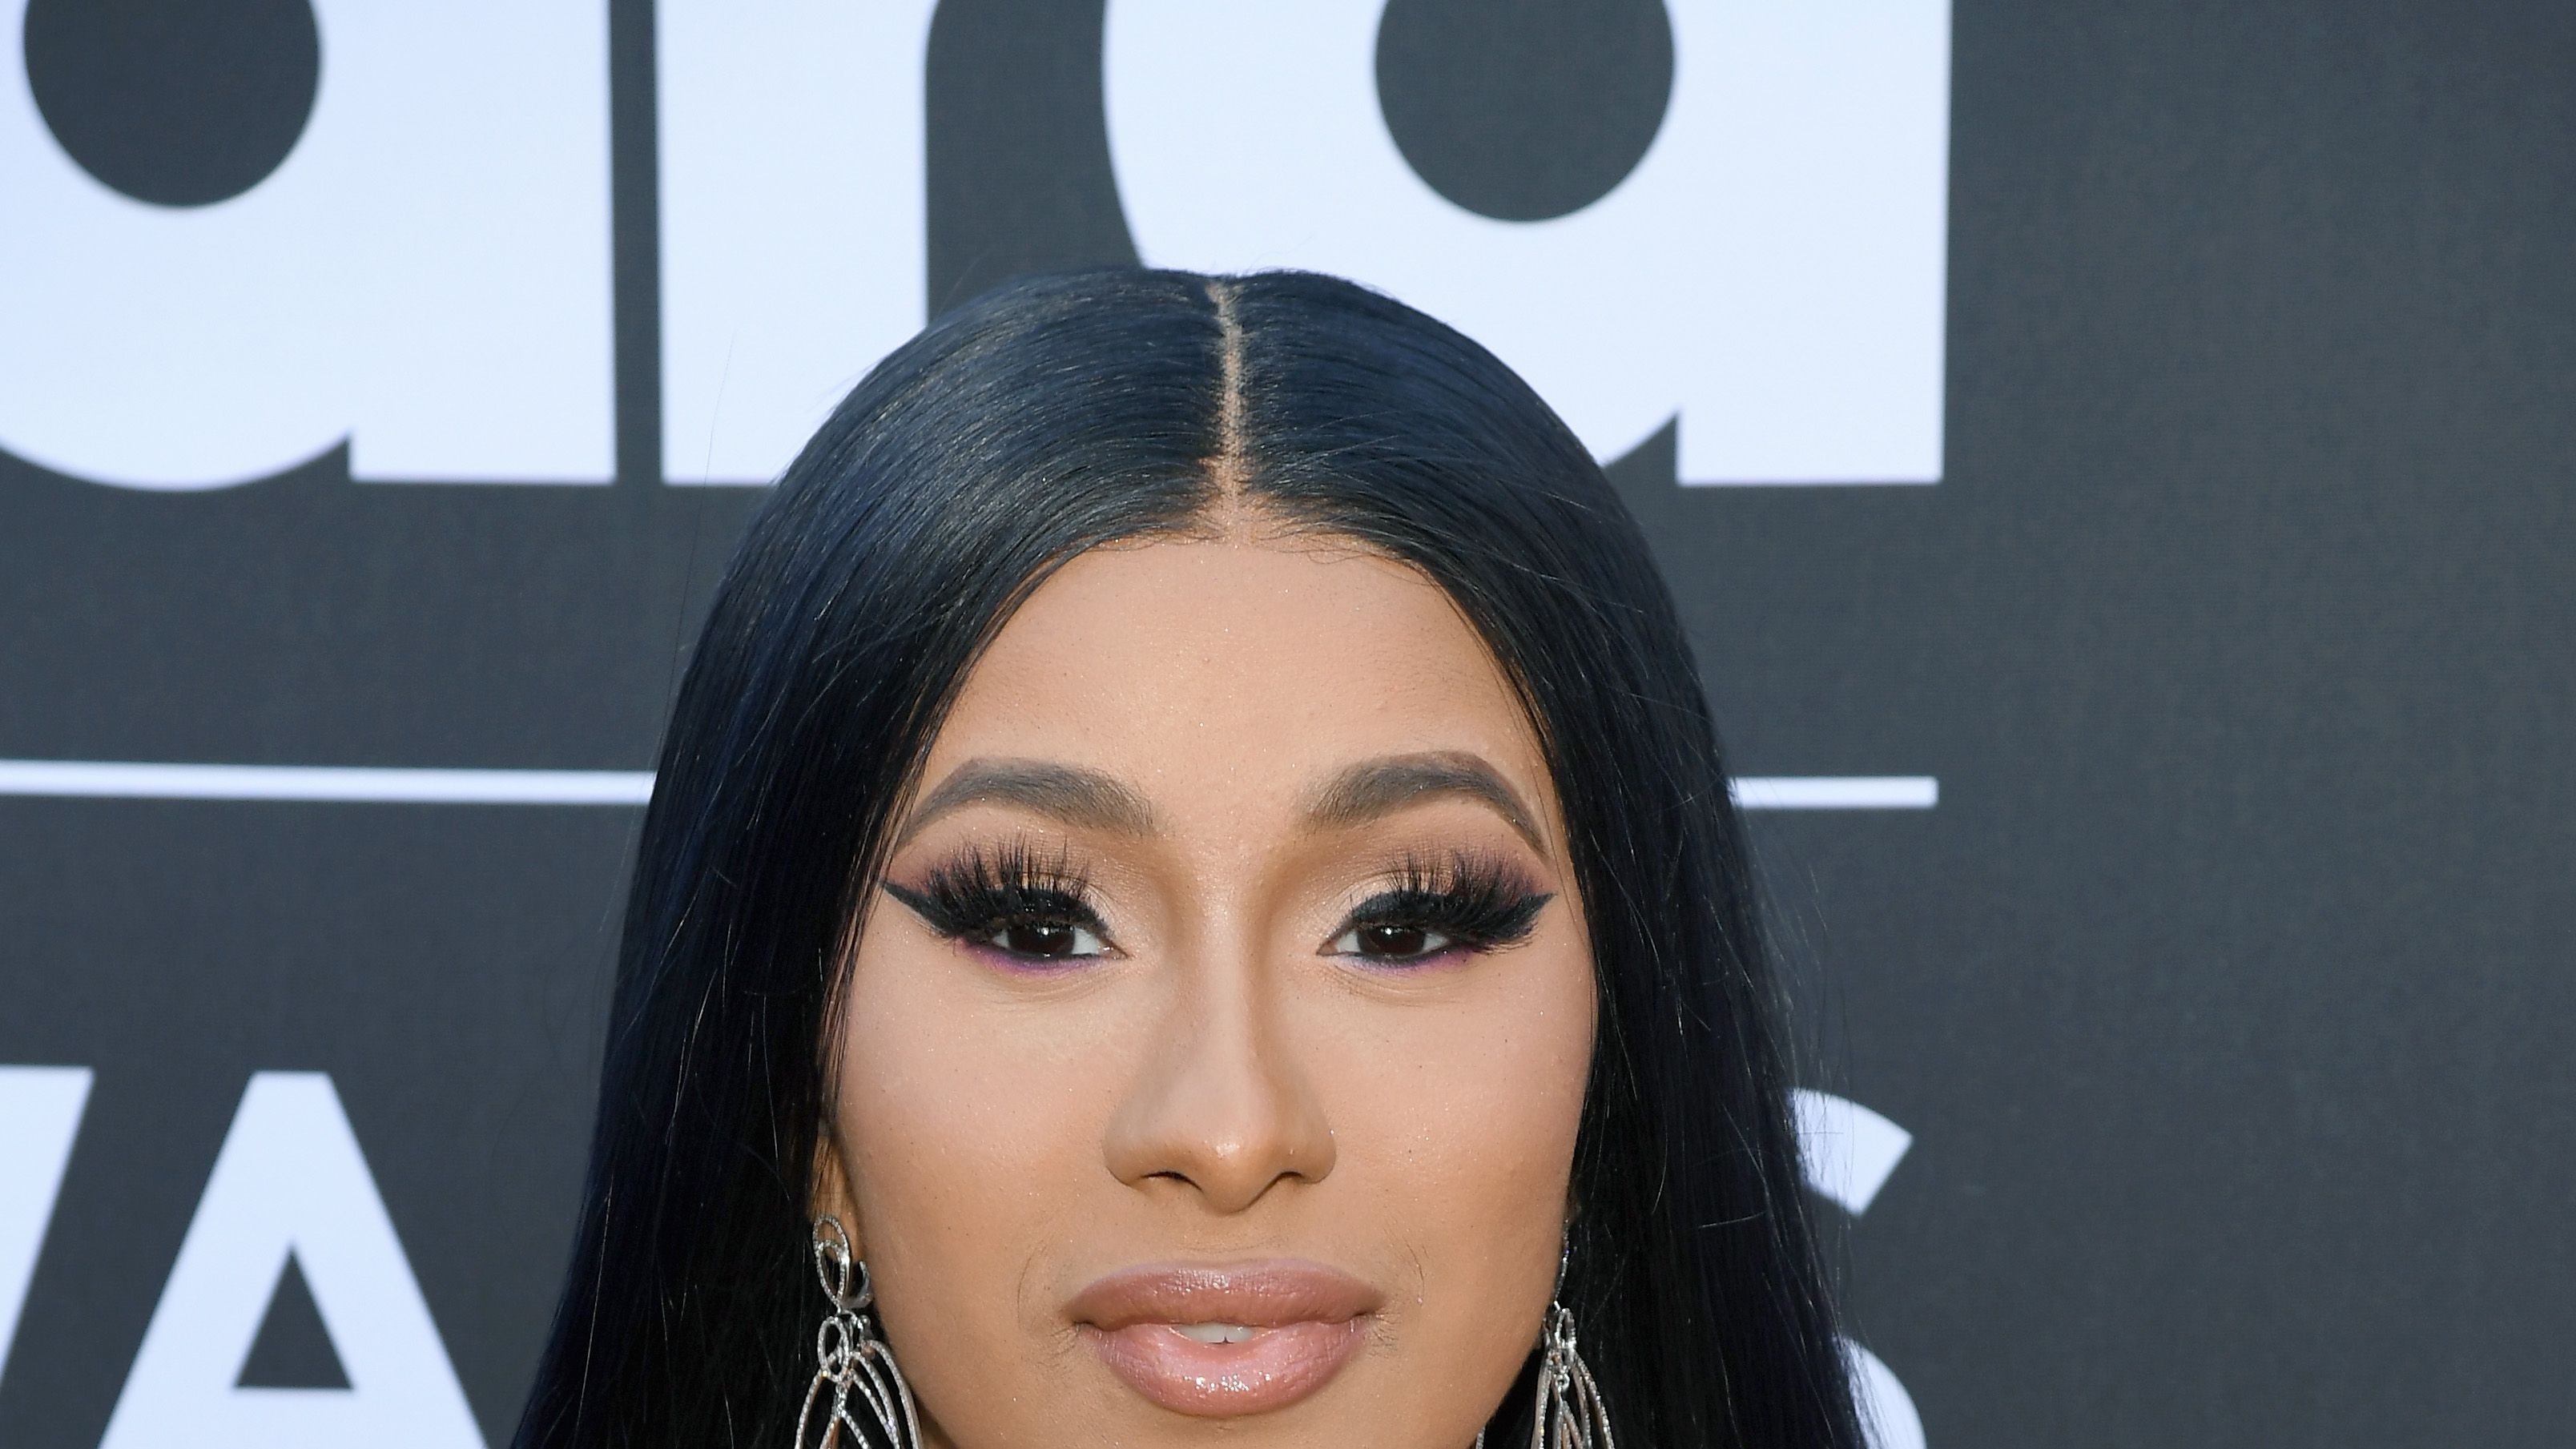 Cardi B Goes Red, Debuts Vibrant New Hair Color One Week After